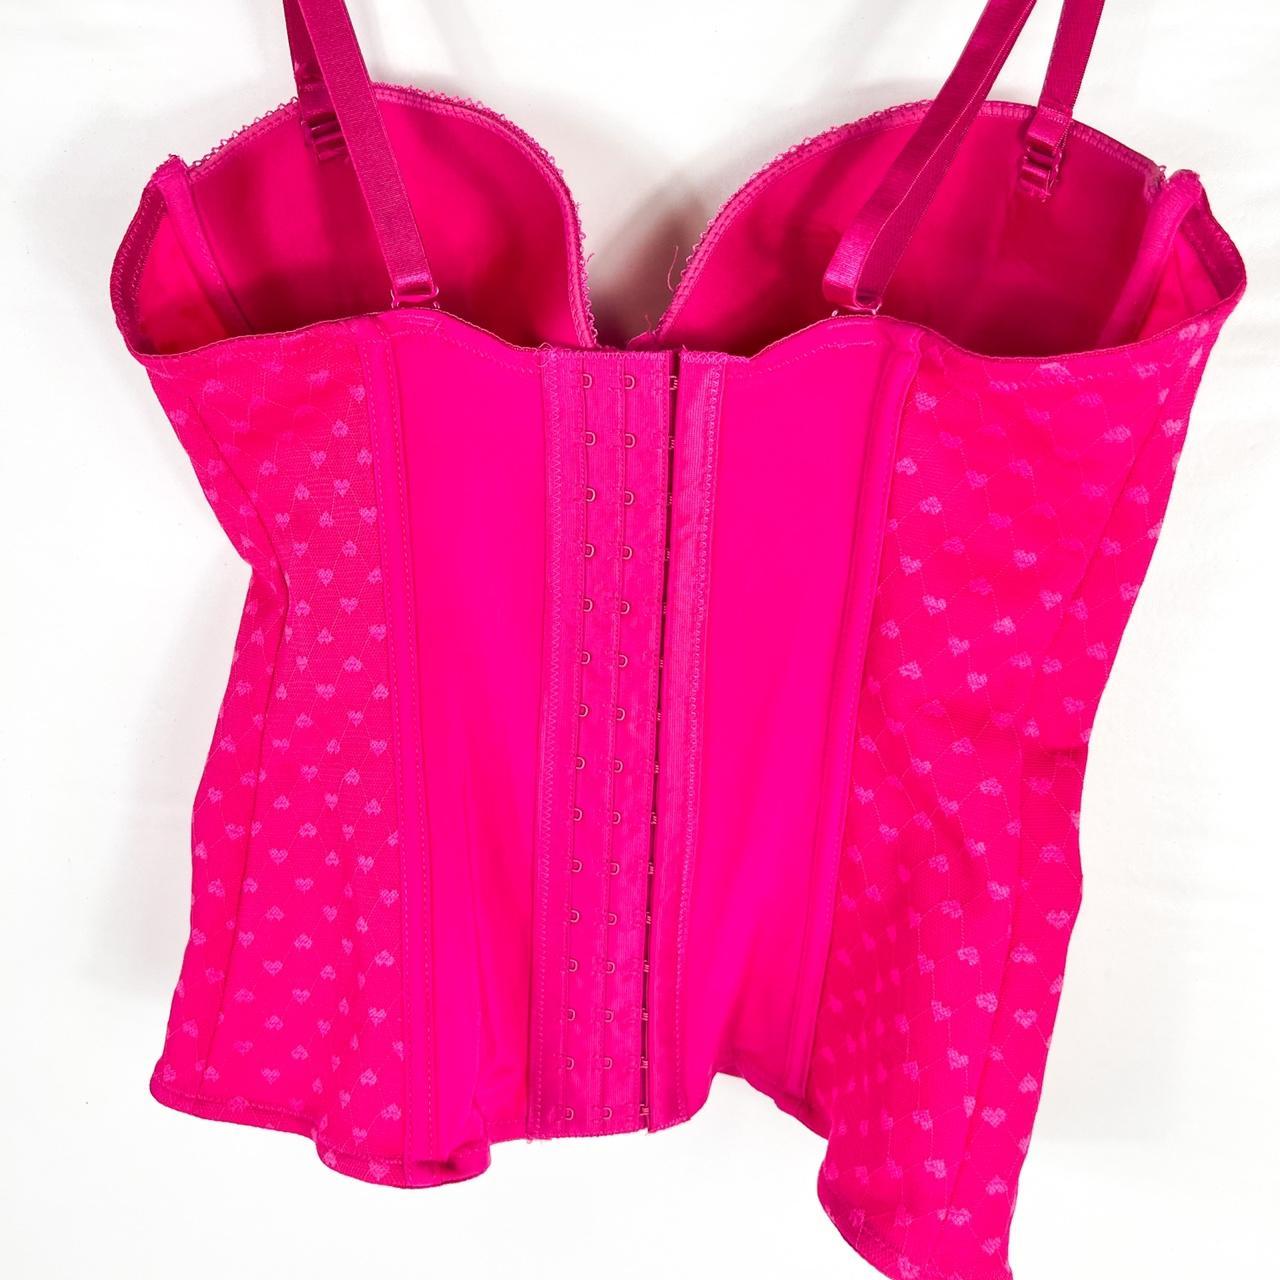 Product Image 2 - Bright pink corset tank top
Pink